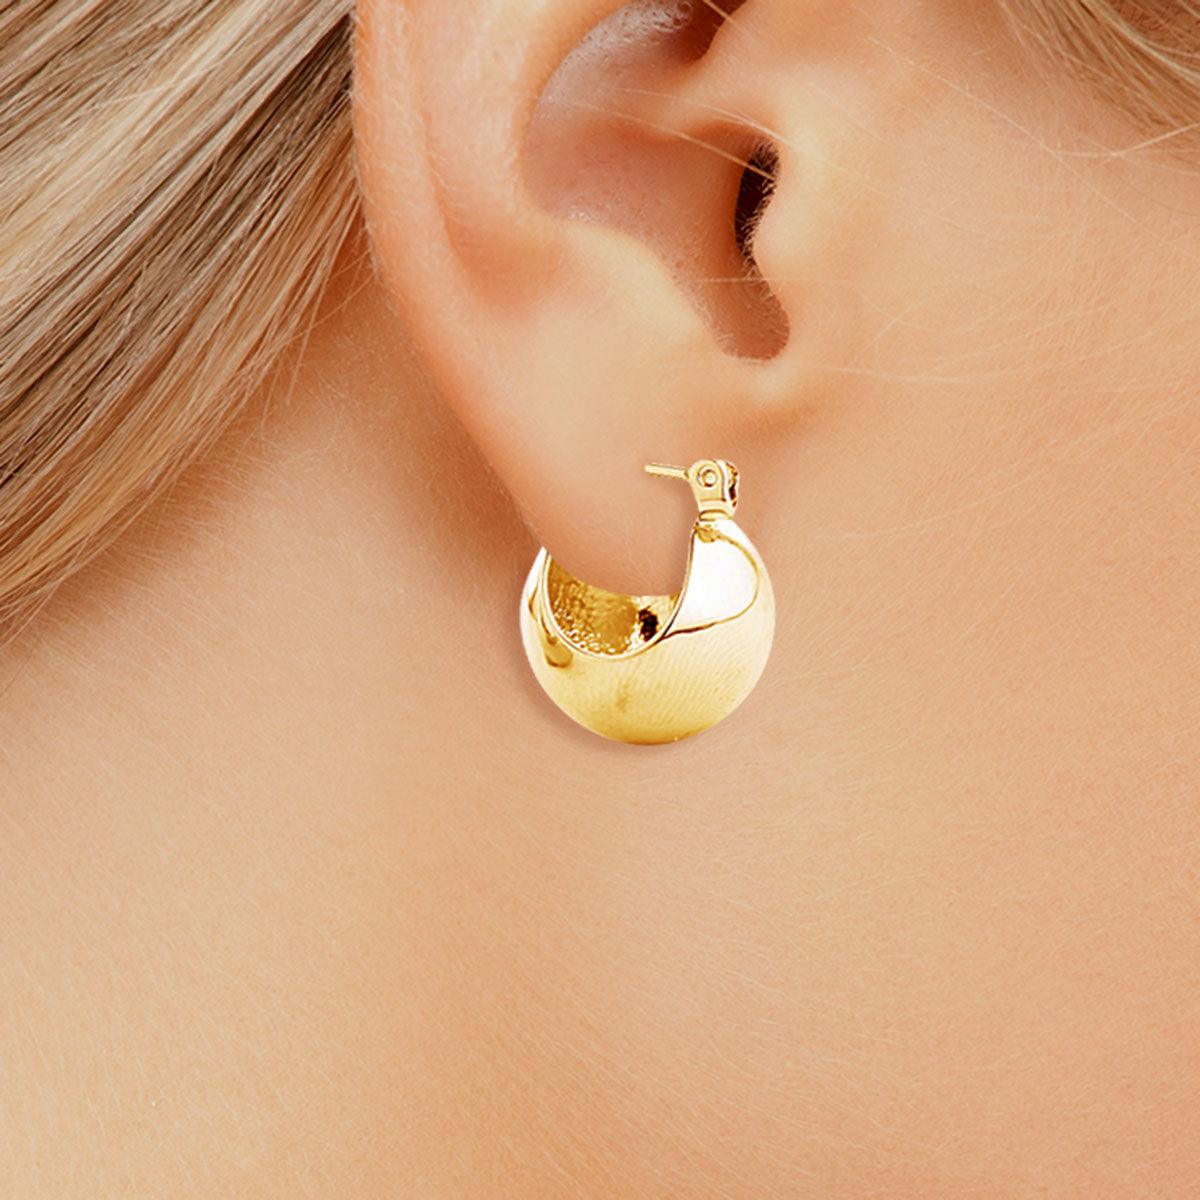 Make a Statement with Medium Gold Ball-hoop Earrings